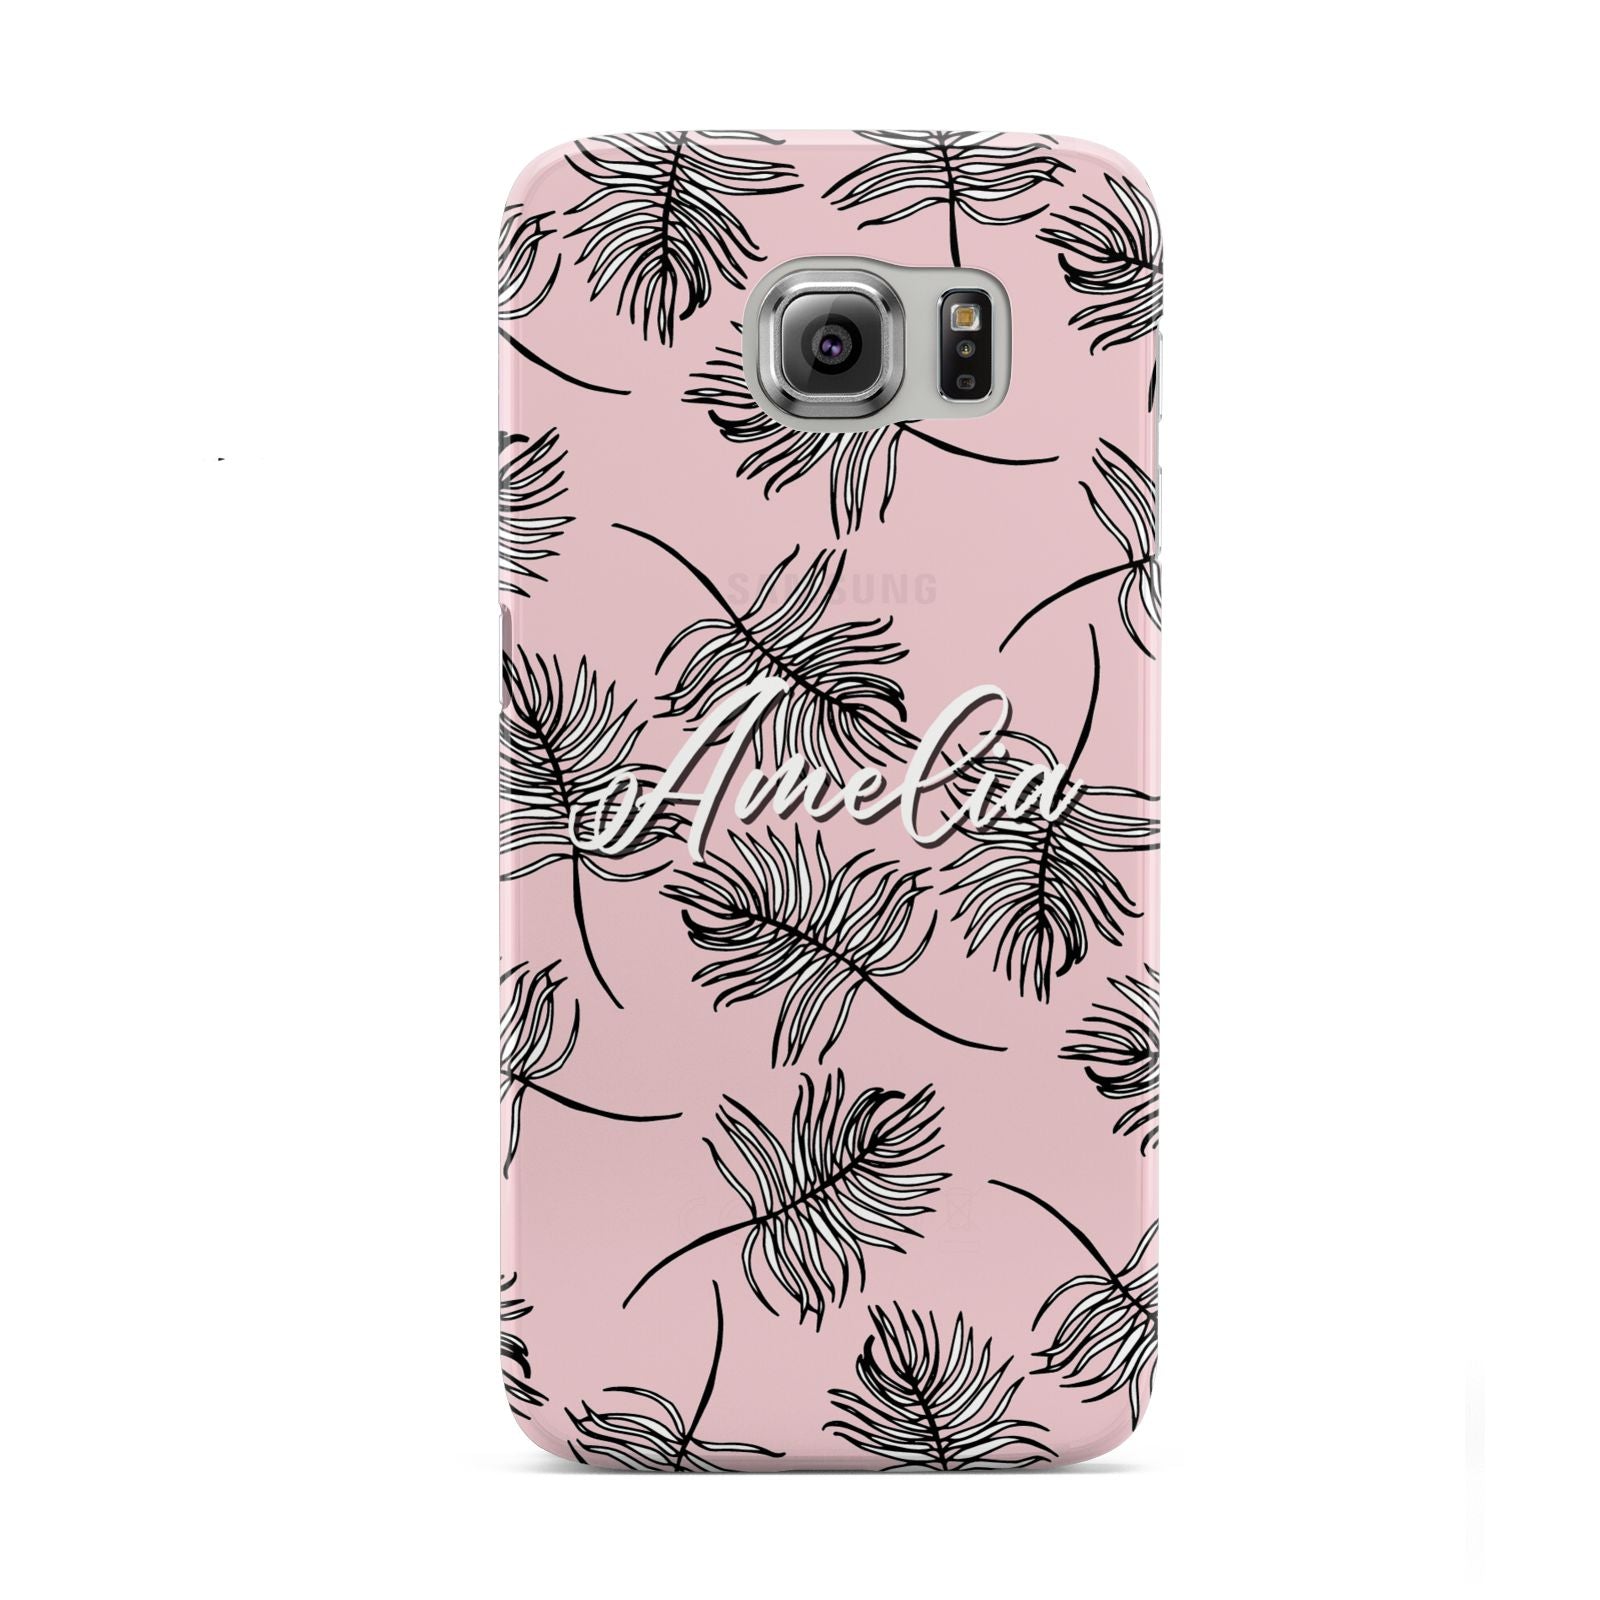 Personalised Pink Monochrome Tropical Leaf Samsung Galaxy S6 Case